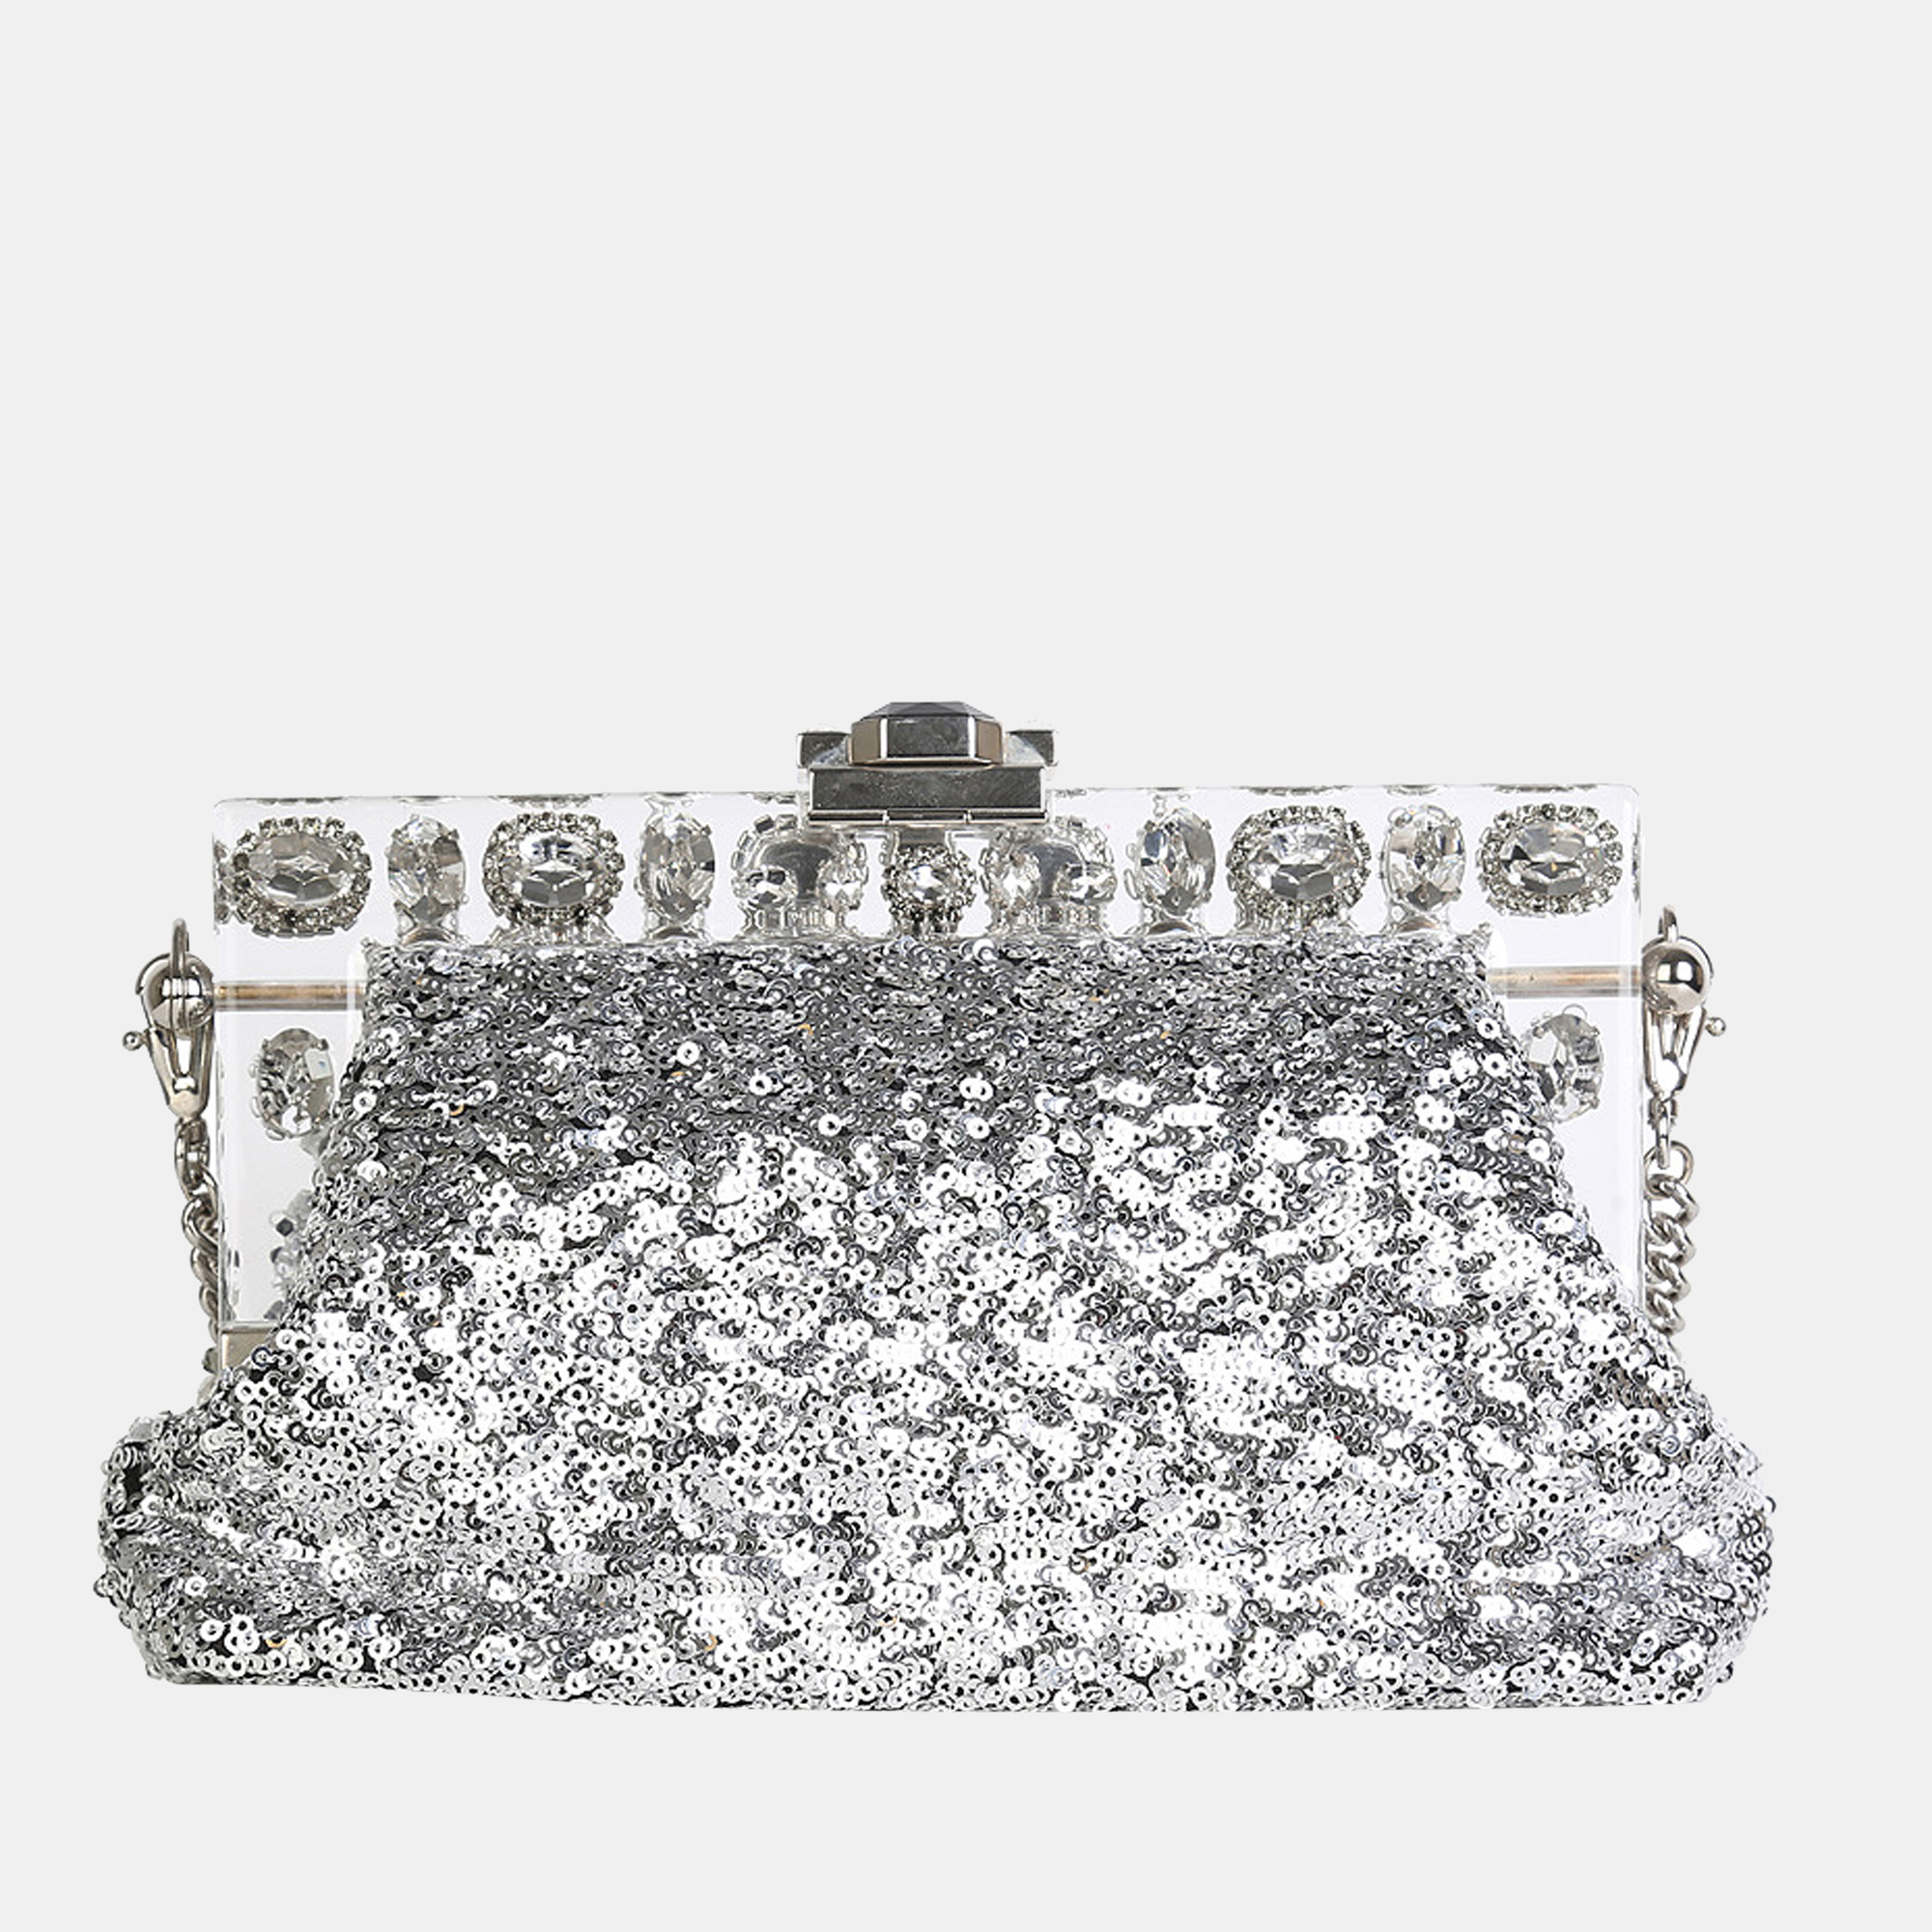 Dolce & Gabbana Silver Sequins & Floral Crystals Clutch With Chain-Link Strap